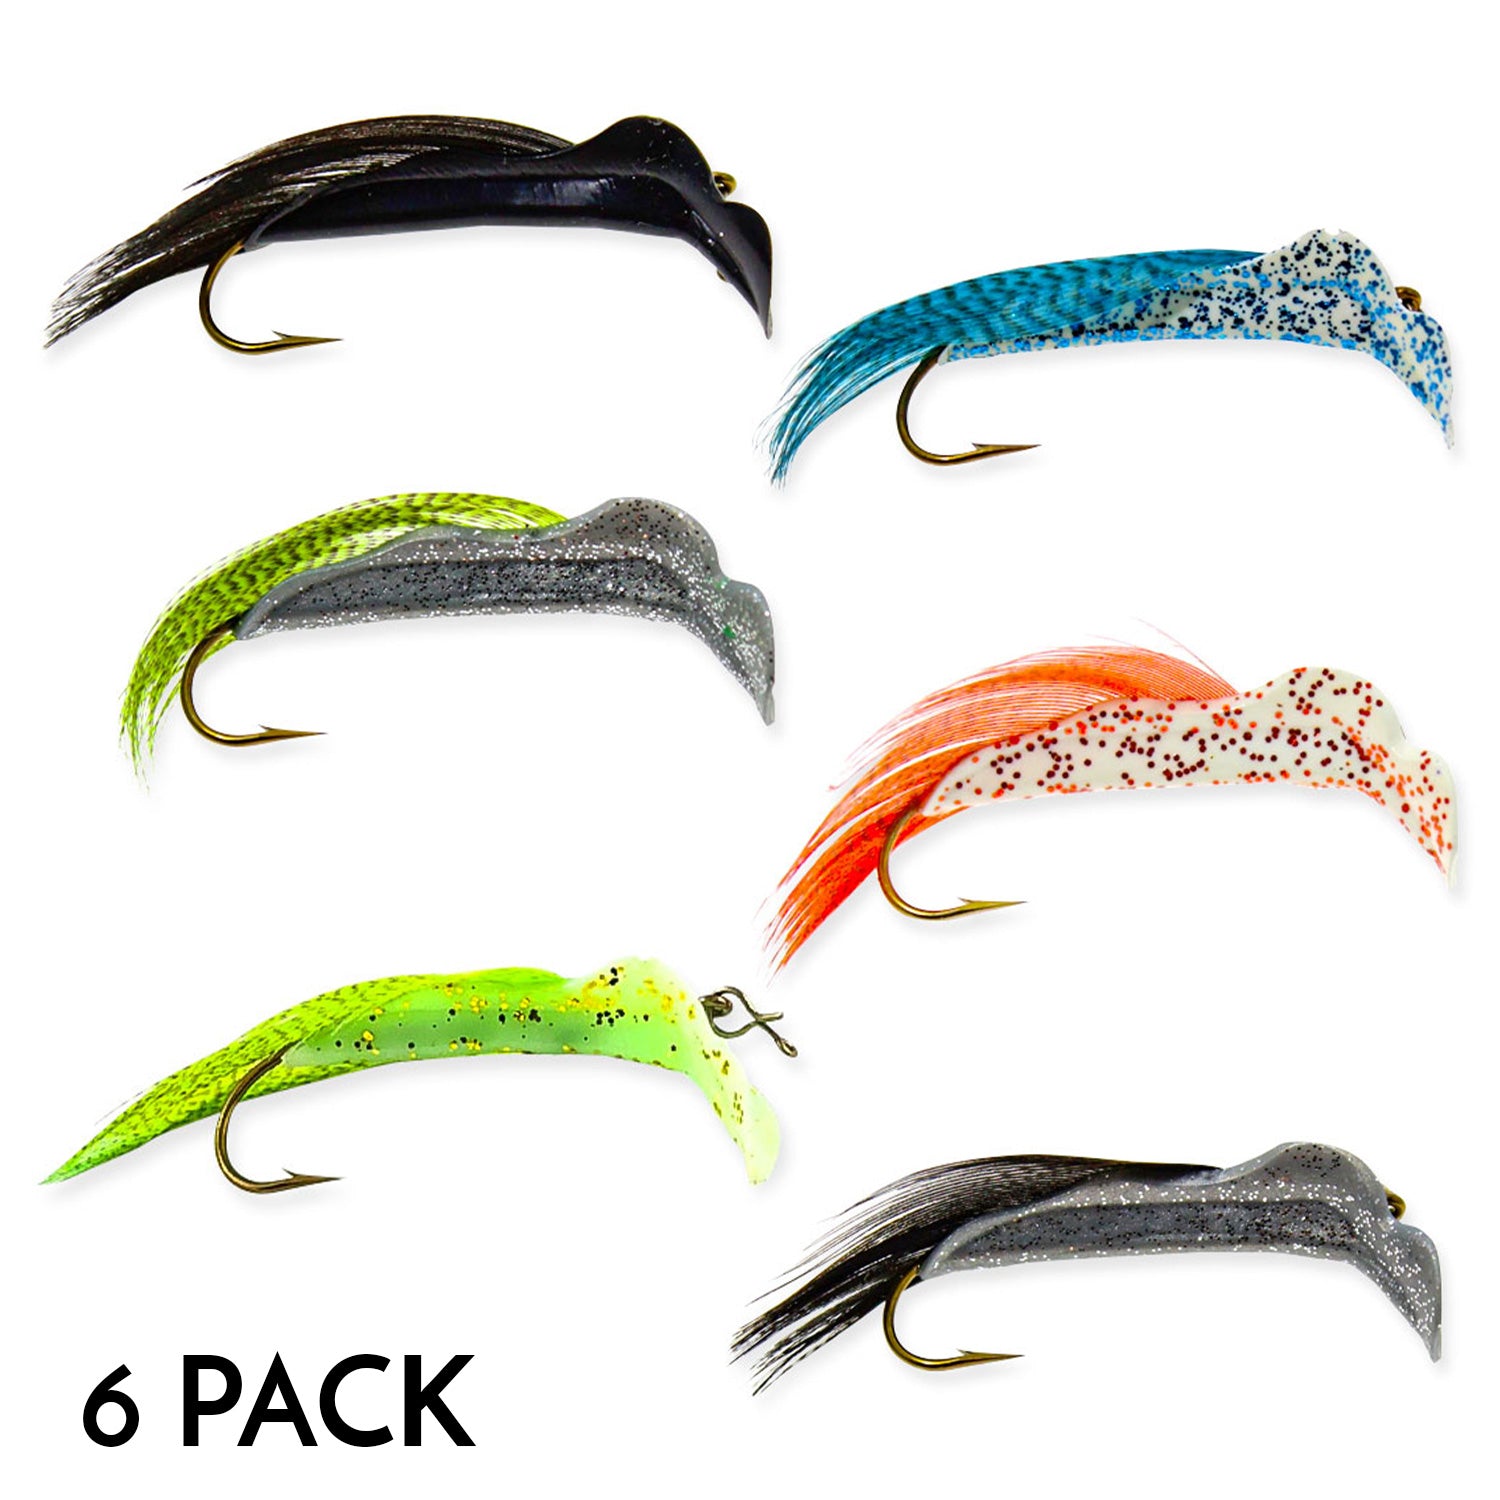 Original Zipper 5 Worm 10 Count Choose From 8 Colors Made In USA Bass  Fishing